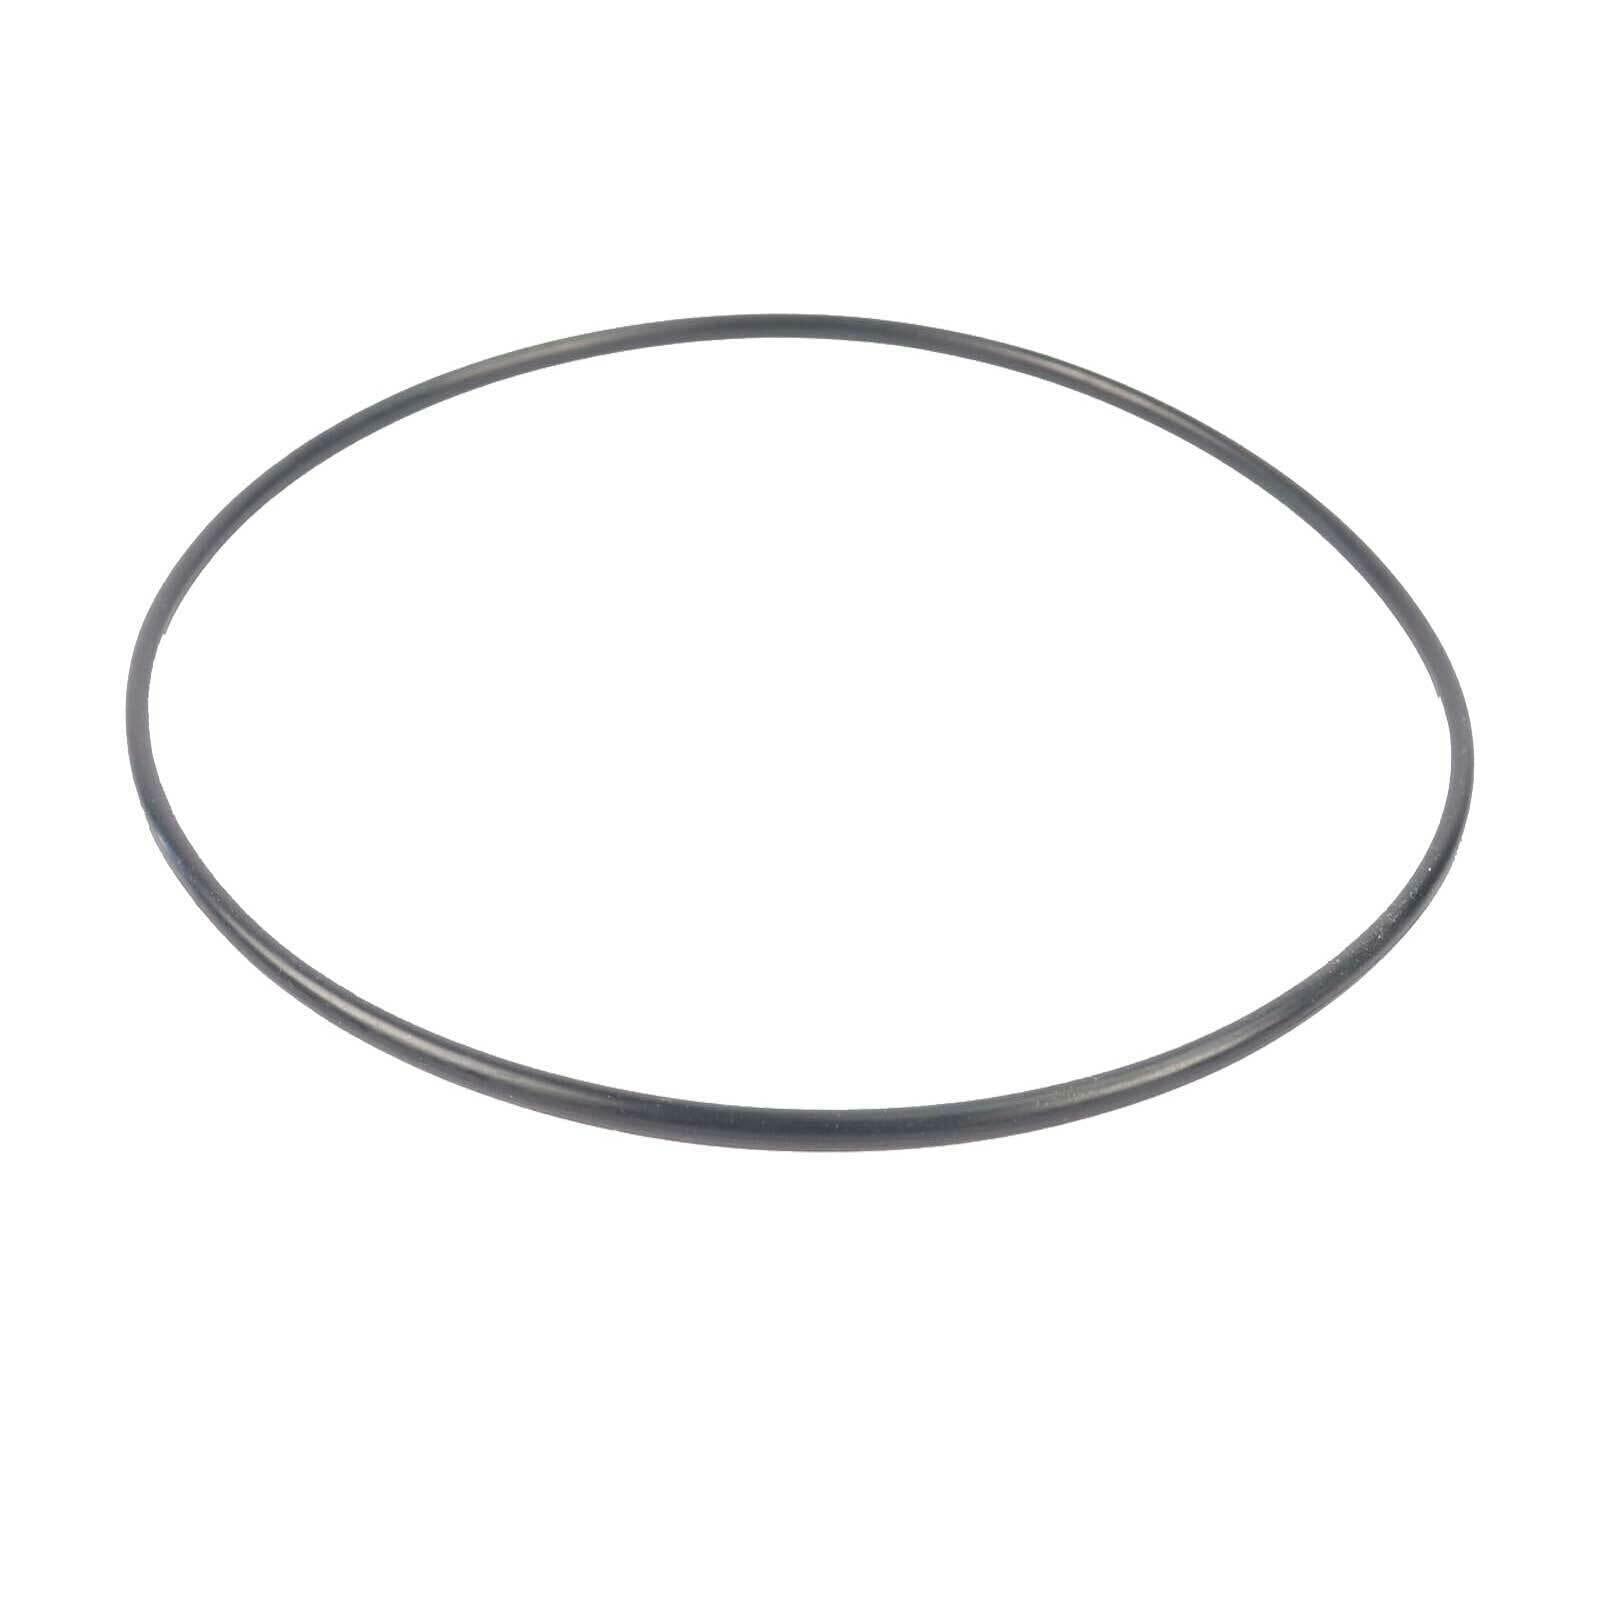 O-Ring Filter Lid For Astral Hurlcon ZX250 10045 78094 Tank Cartridge Filter Sparesbarn